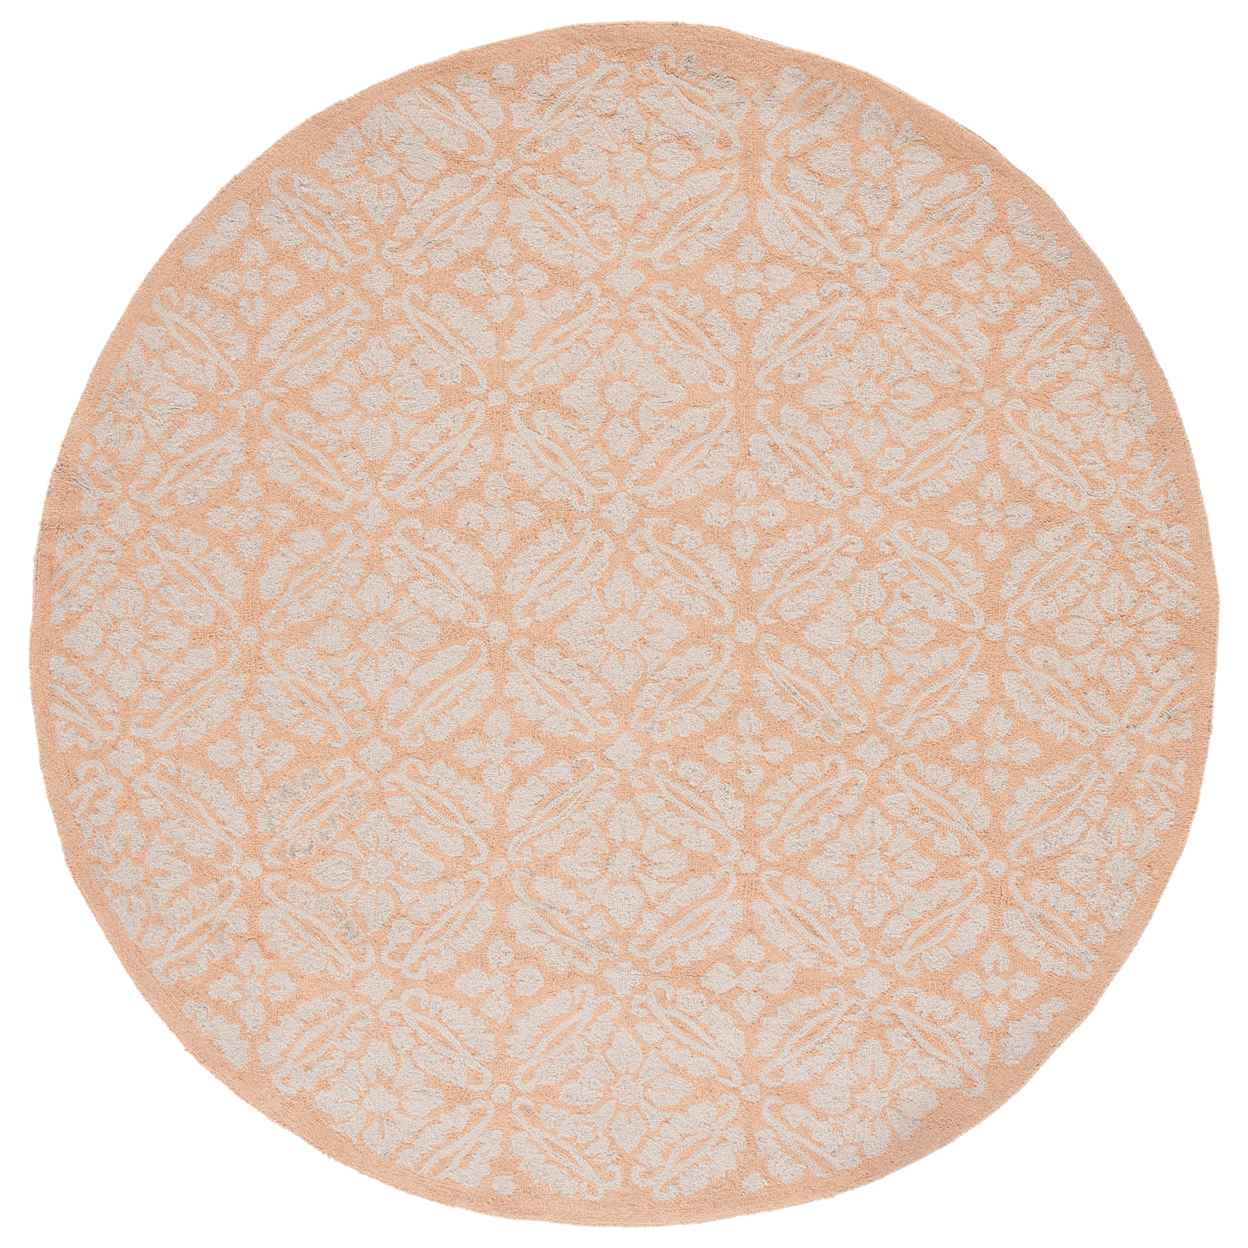 SAFAVIEH Chelsea Collection HK723C Hand-hooked Blush Rug - 5' 6 Round